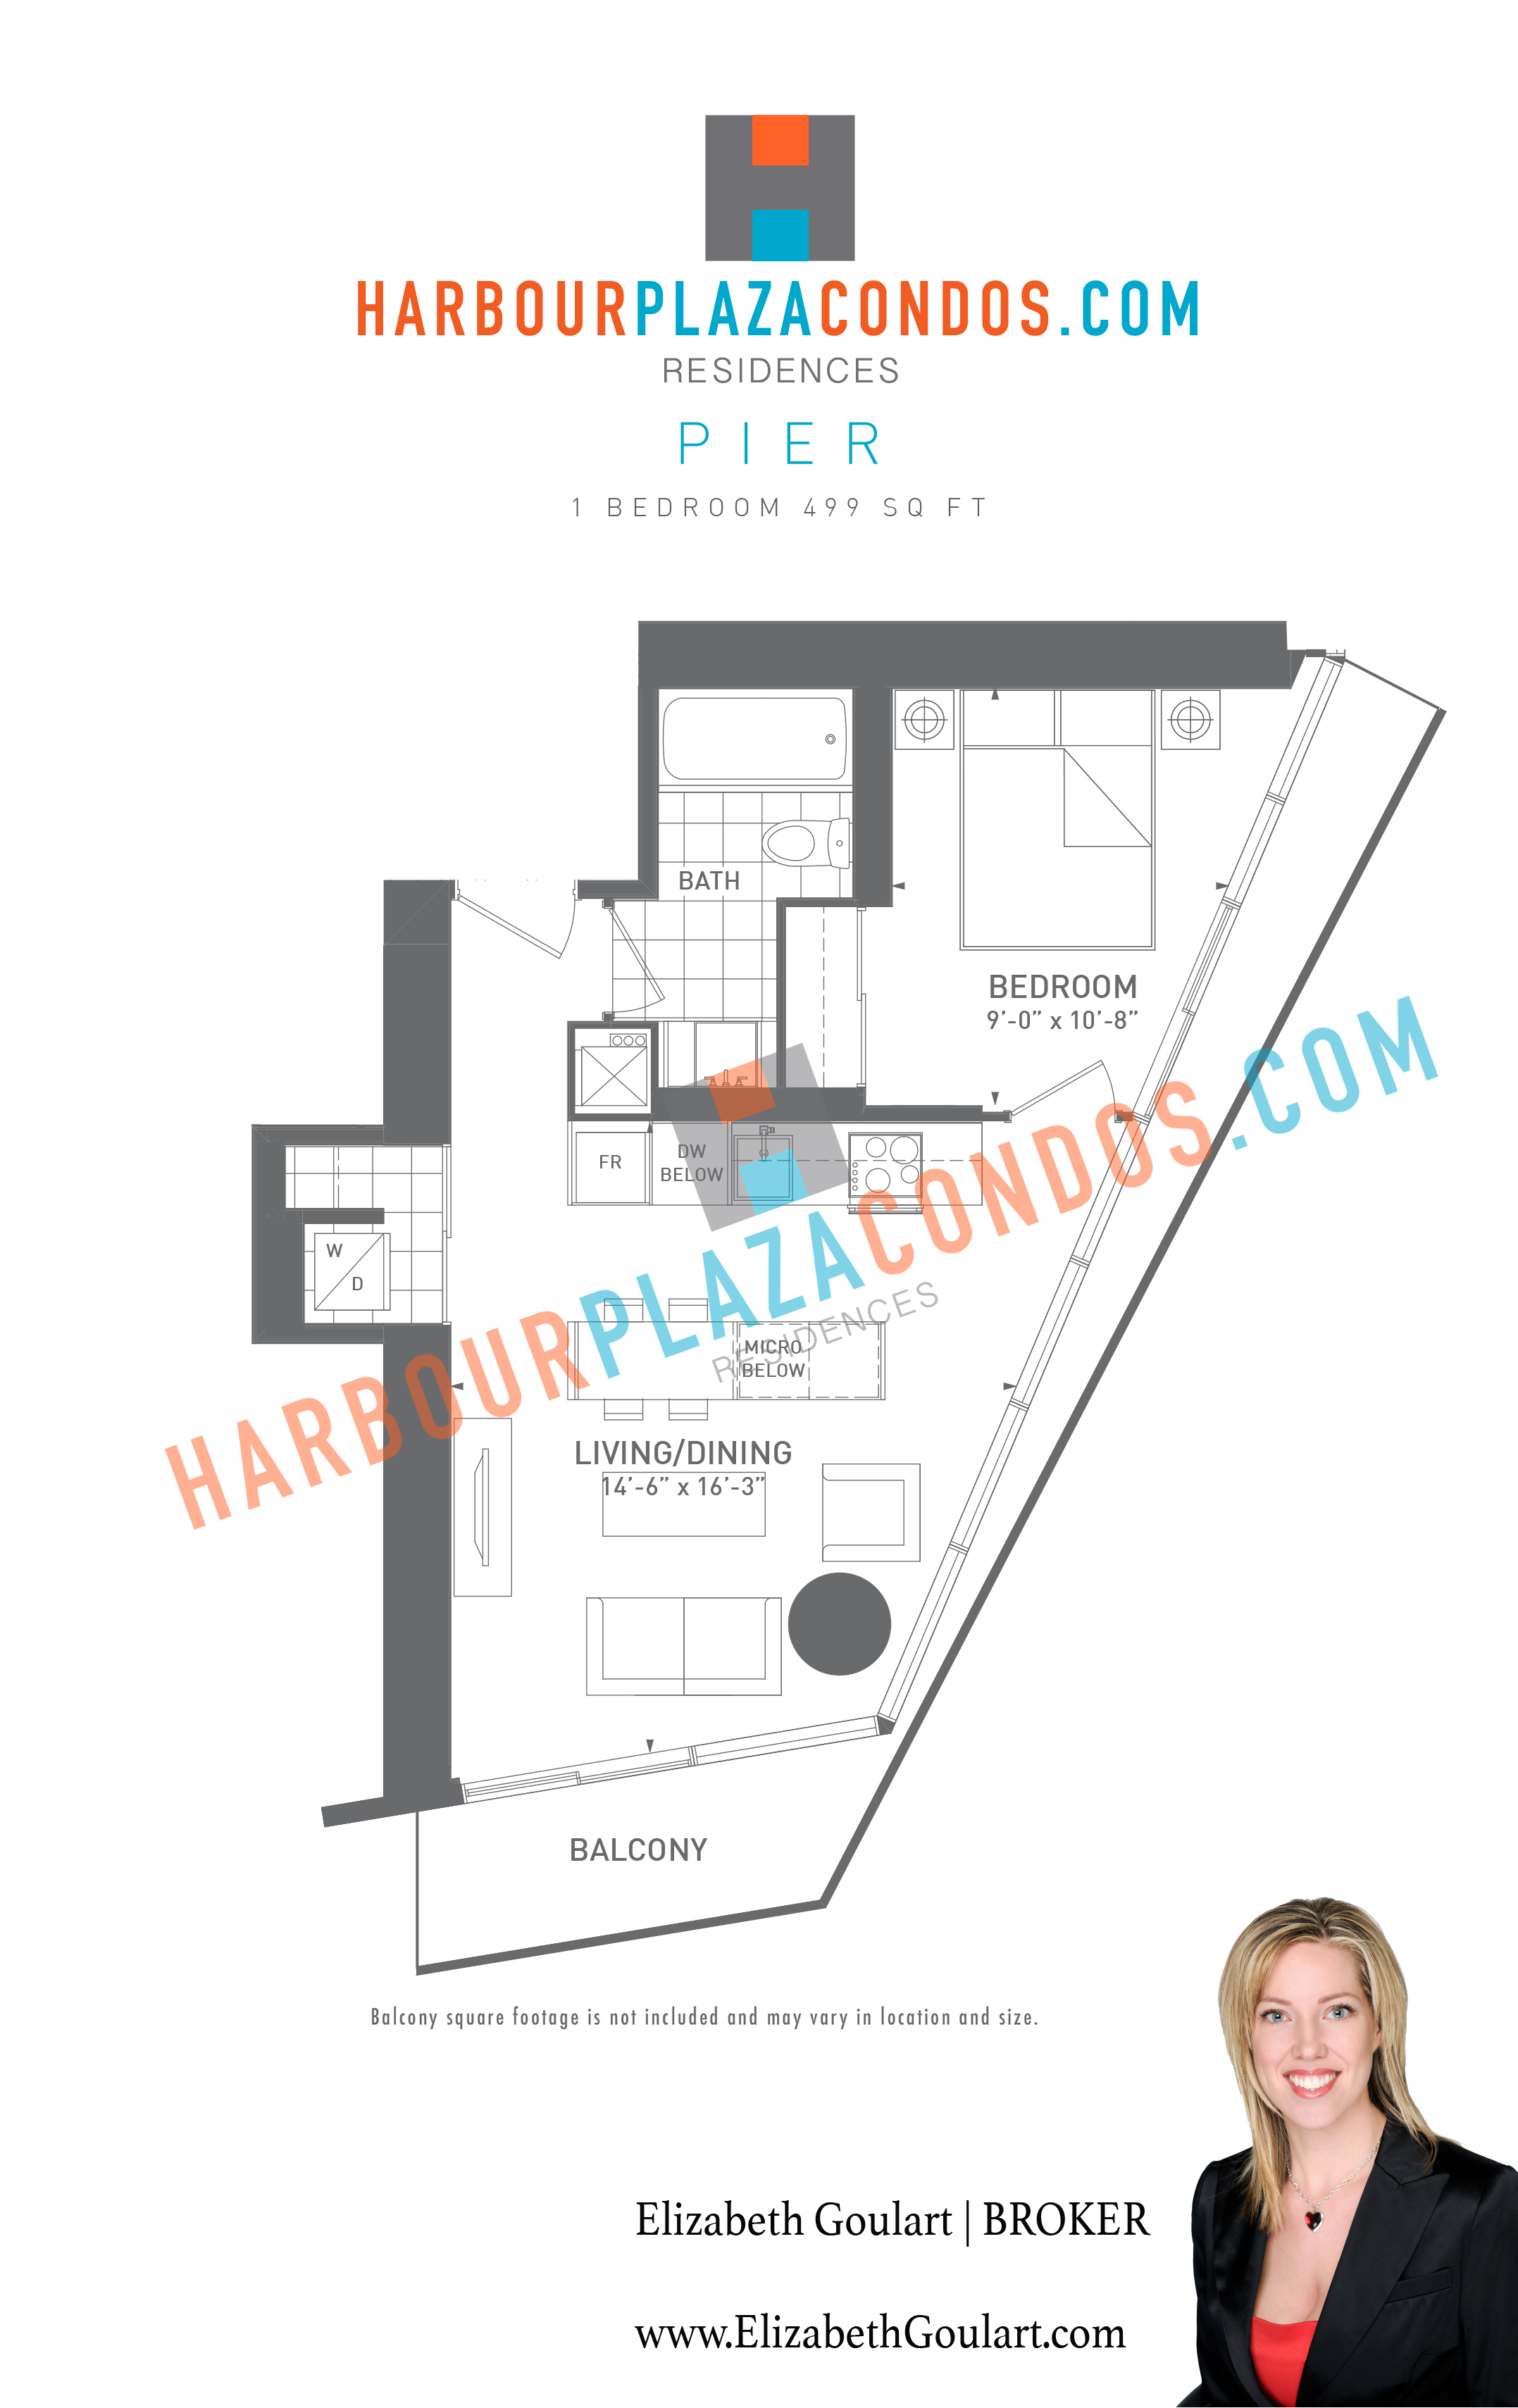 Harbour Plaza Condos For Sale / Rent